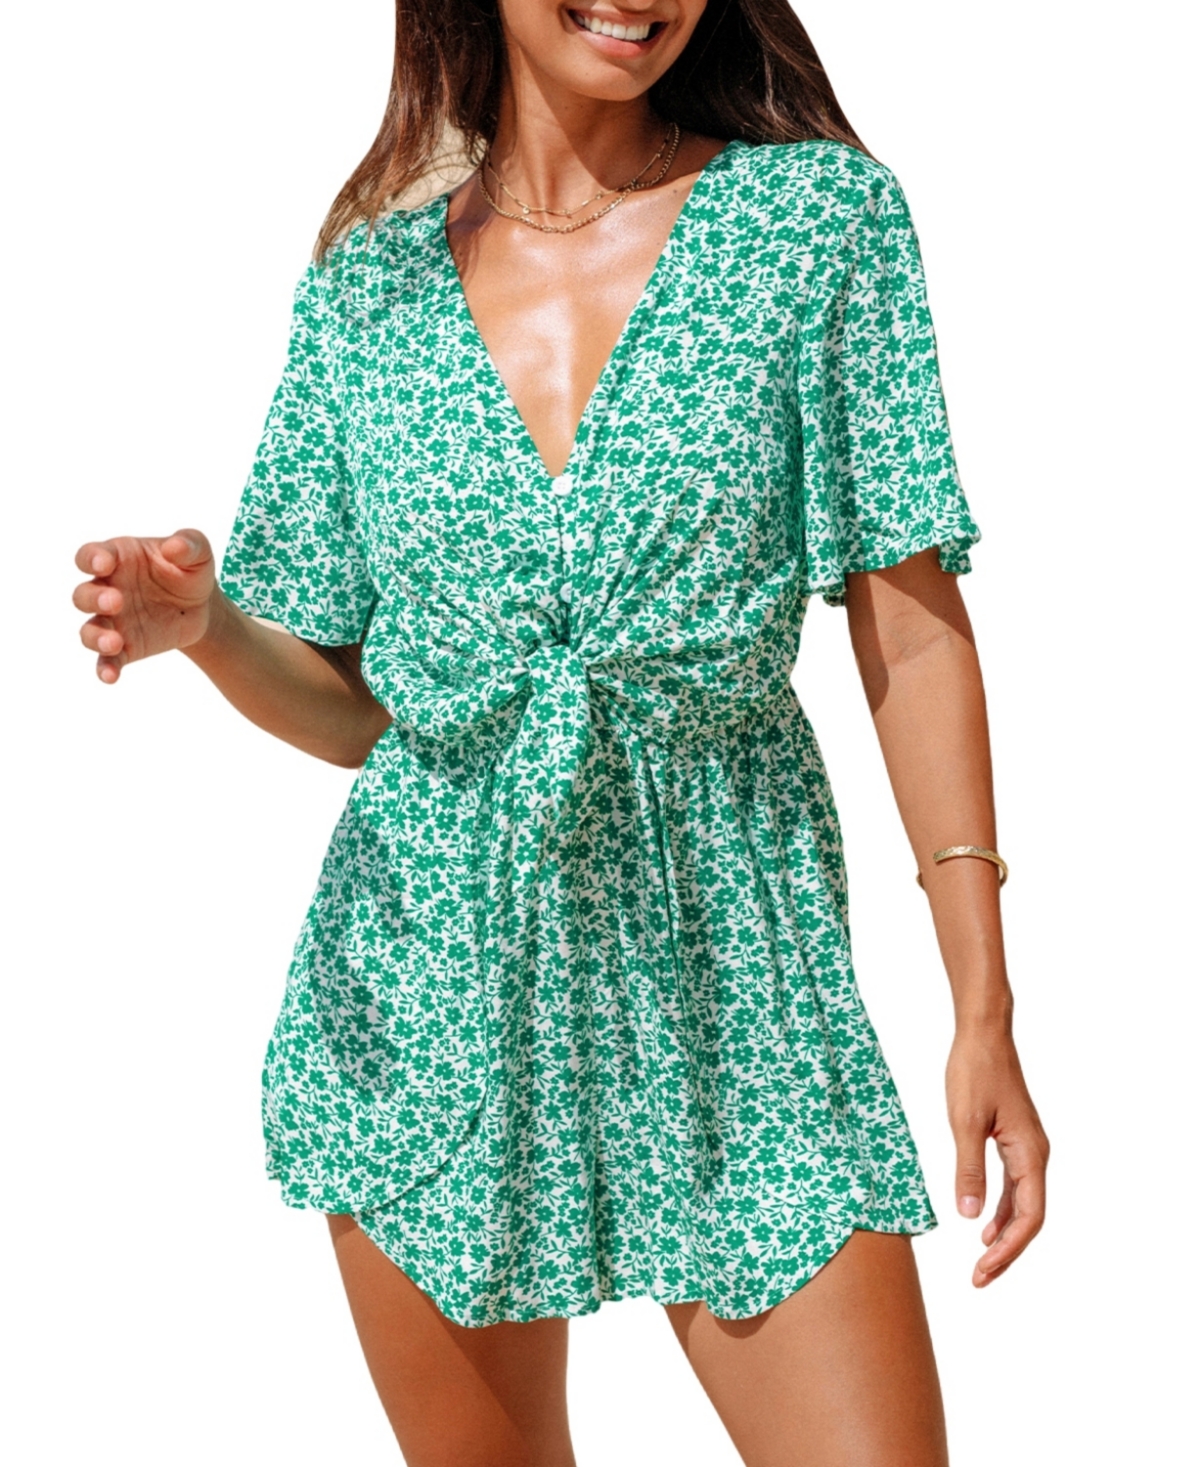 Women's Green & White Ditsy Plunging Front Tie Romper - Light/pastel green